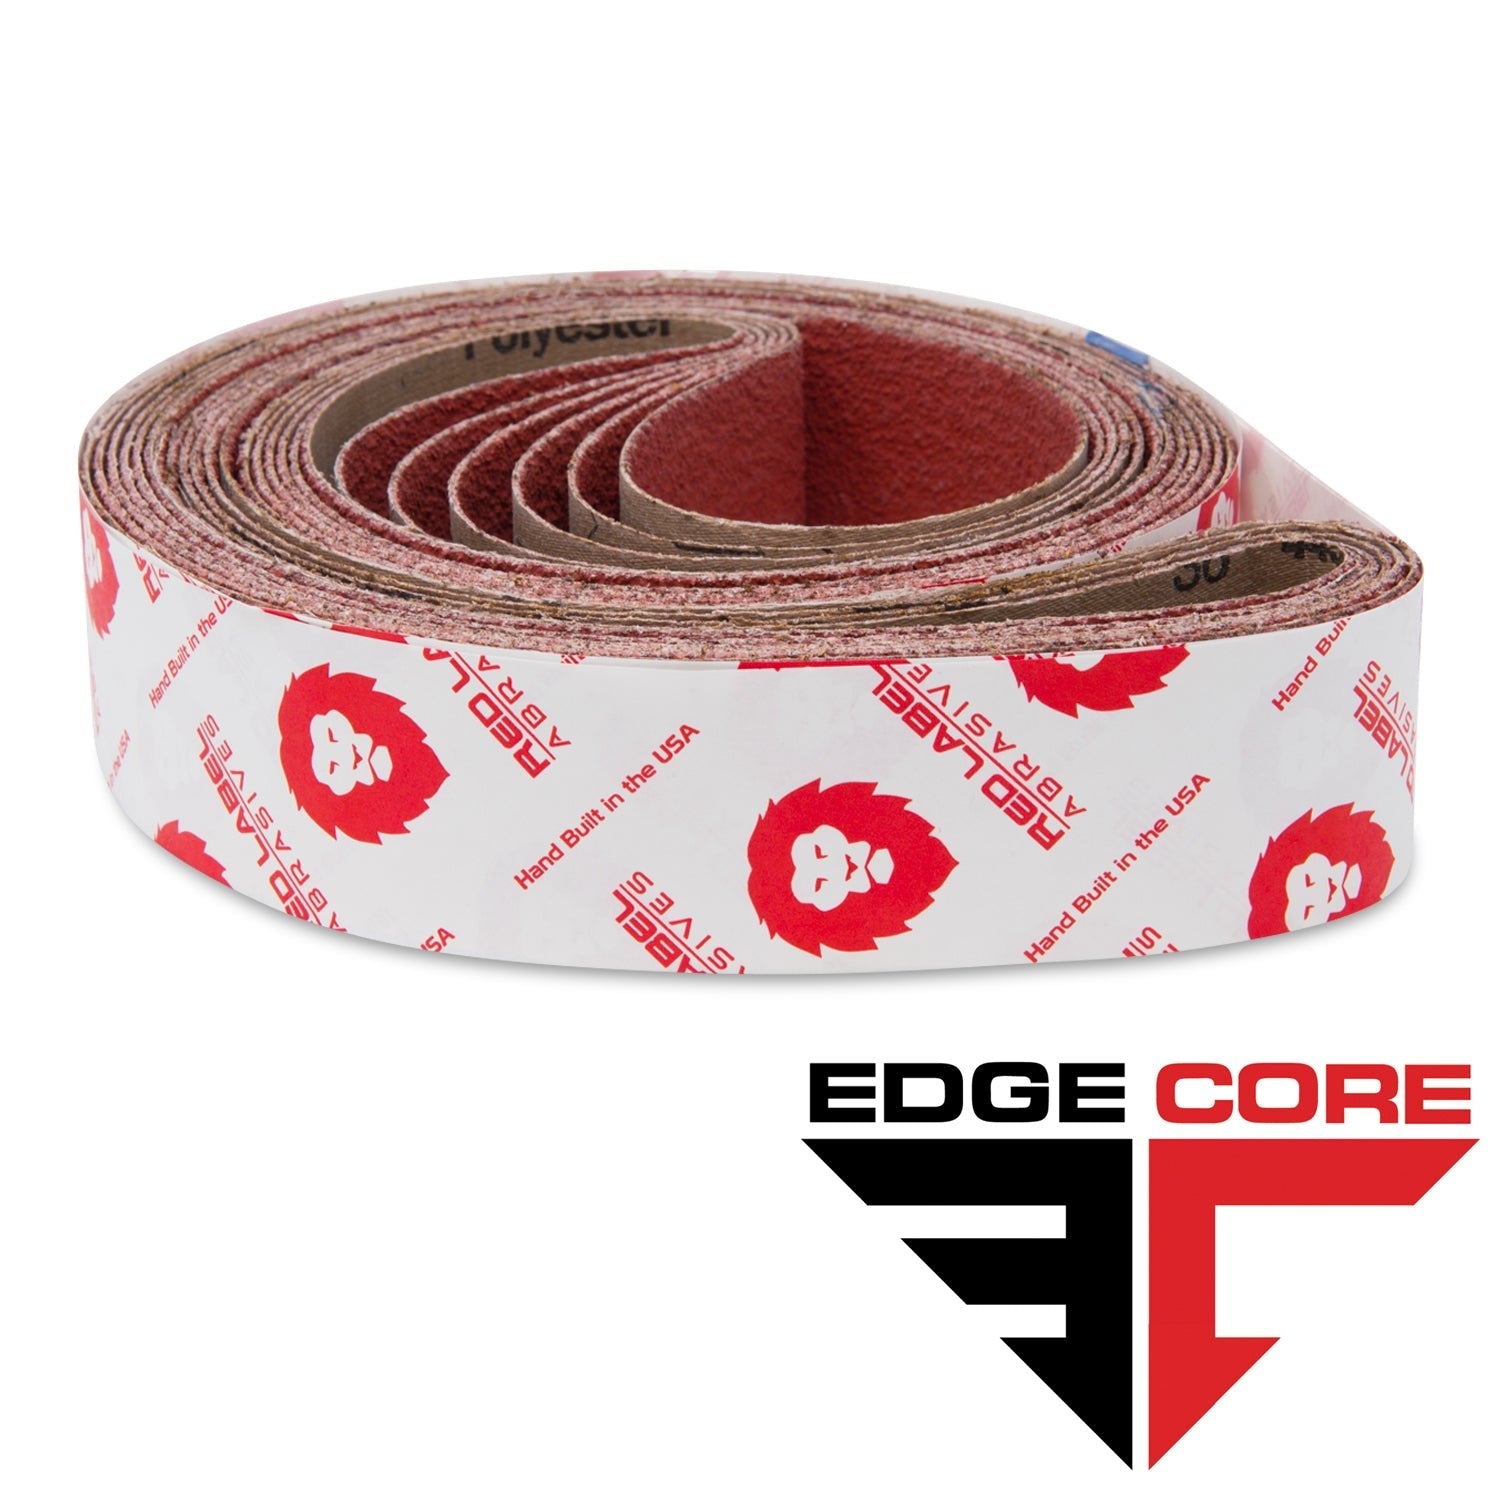 2 X 48 Inch EdgeCore Ceramic Grinding Belts, 6 Pack - Red Label Abrasives